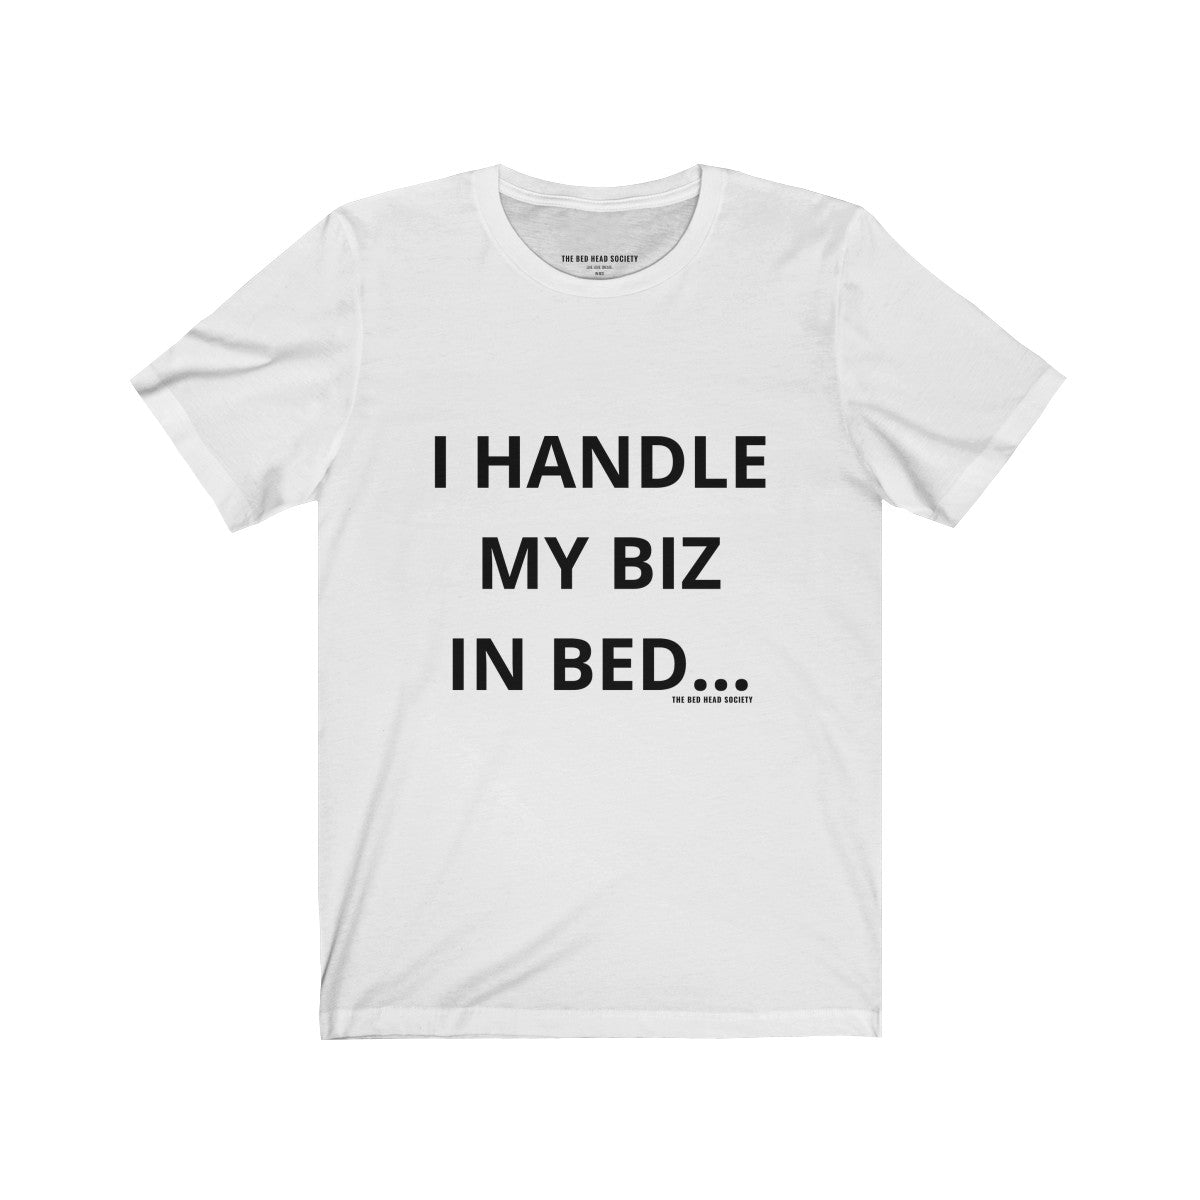 I Handle My Biz In Bed... T-Shirt - Shop Bed Head Society